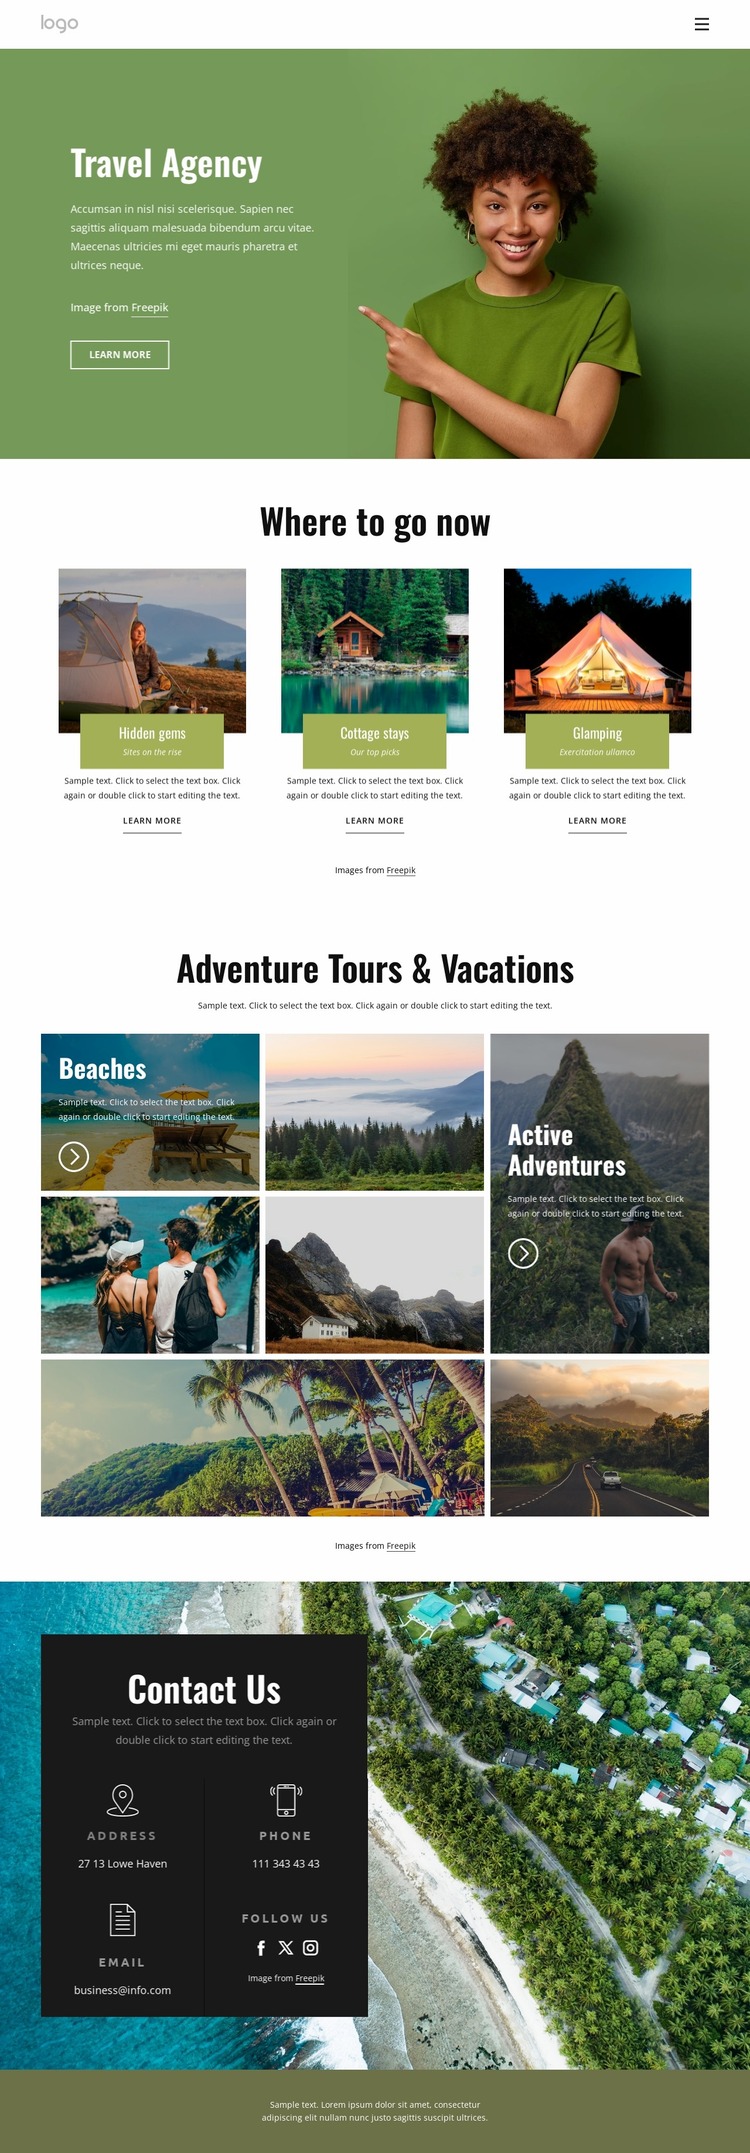 Adventure tours and vacations Website Mockup